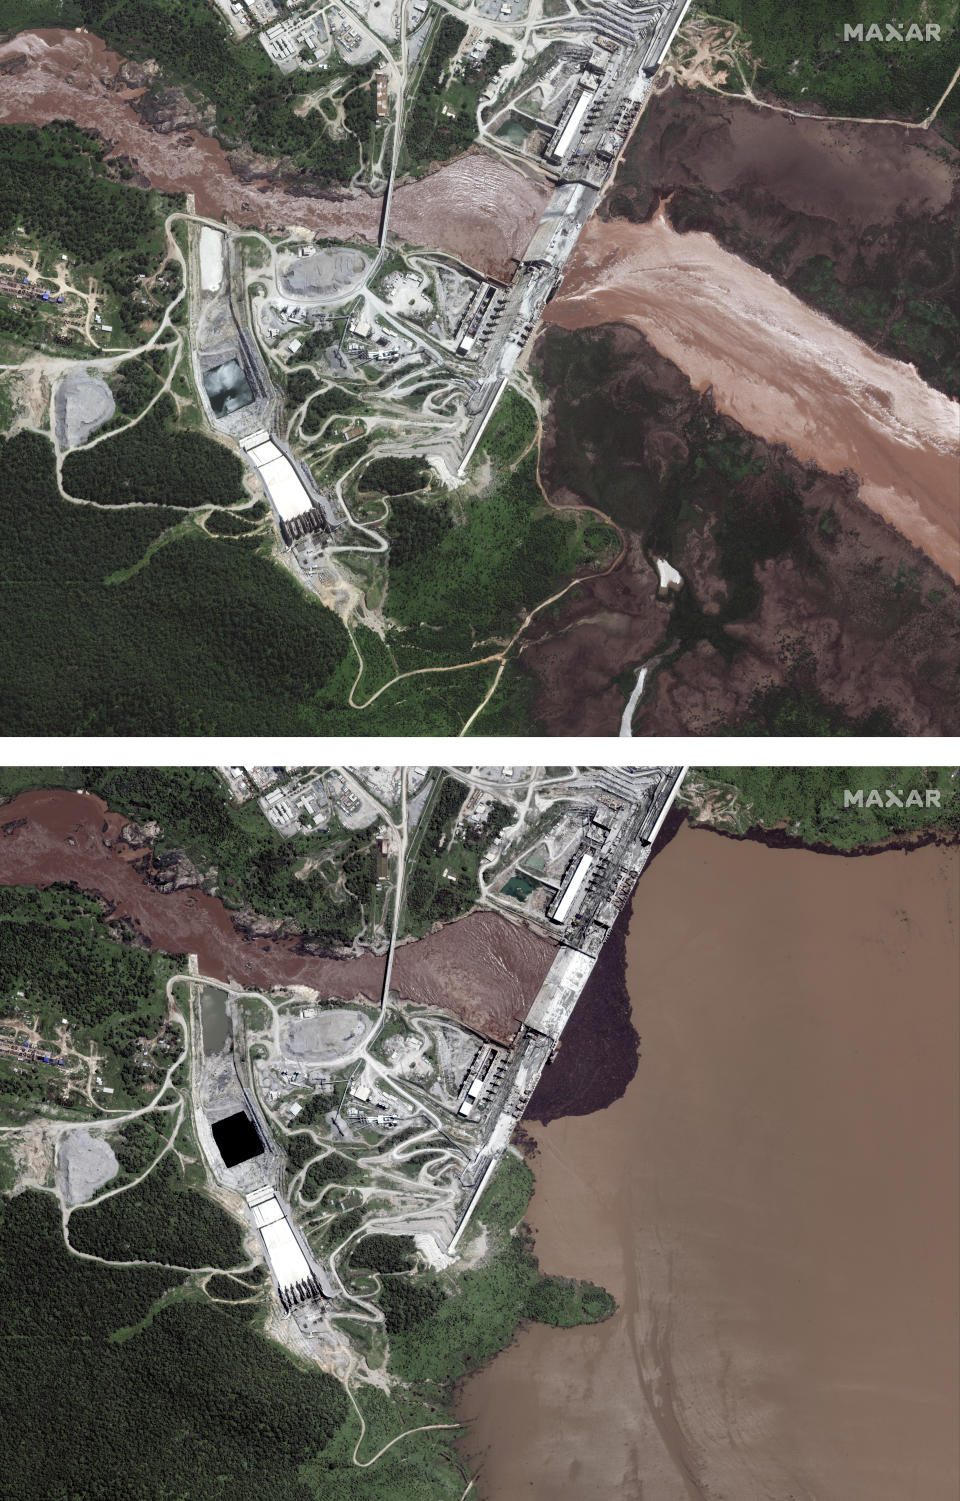 This combination image made from satellite images taken on Friday, June 26, 2020, above, and Sunday, July 12, 2020, below, shows the Grand Ethiopian Renaissance Dam on the Blue Nile river in the Benishangul-Gumuz region of Ethiopia. New satellite imagery shows the reservoir behind Ethiopia's disputed hydroelectric dam beginning to fill, but an analyst says it's likely due to seasonal rains instead of government action. (Maxar Technologies via AP)